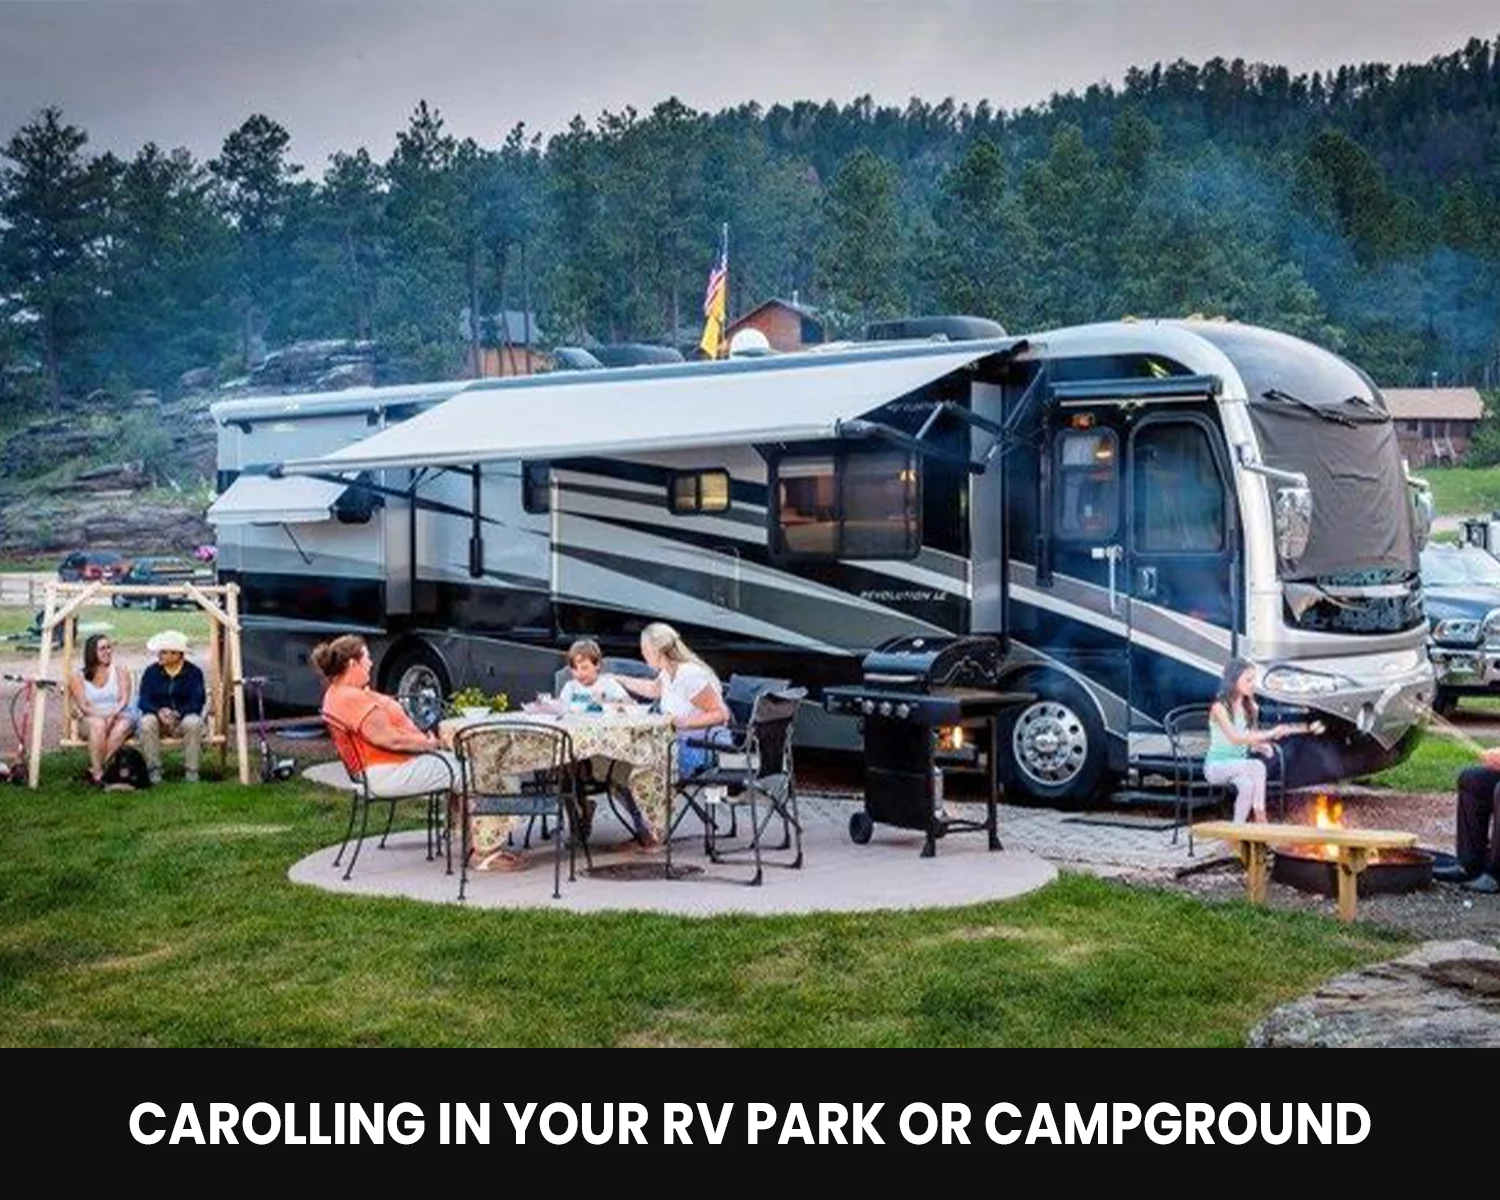 Carolling in Your RV Park or Campground